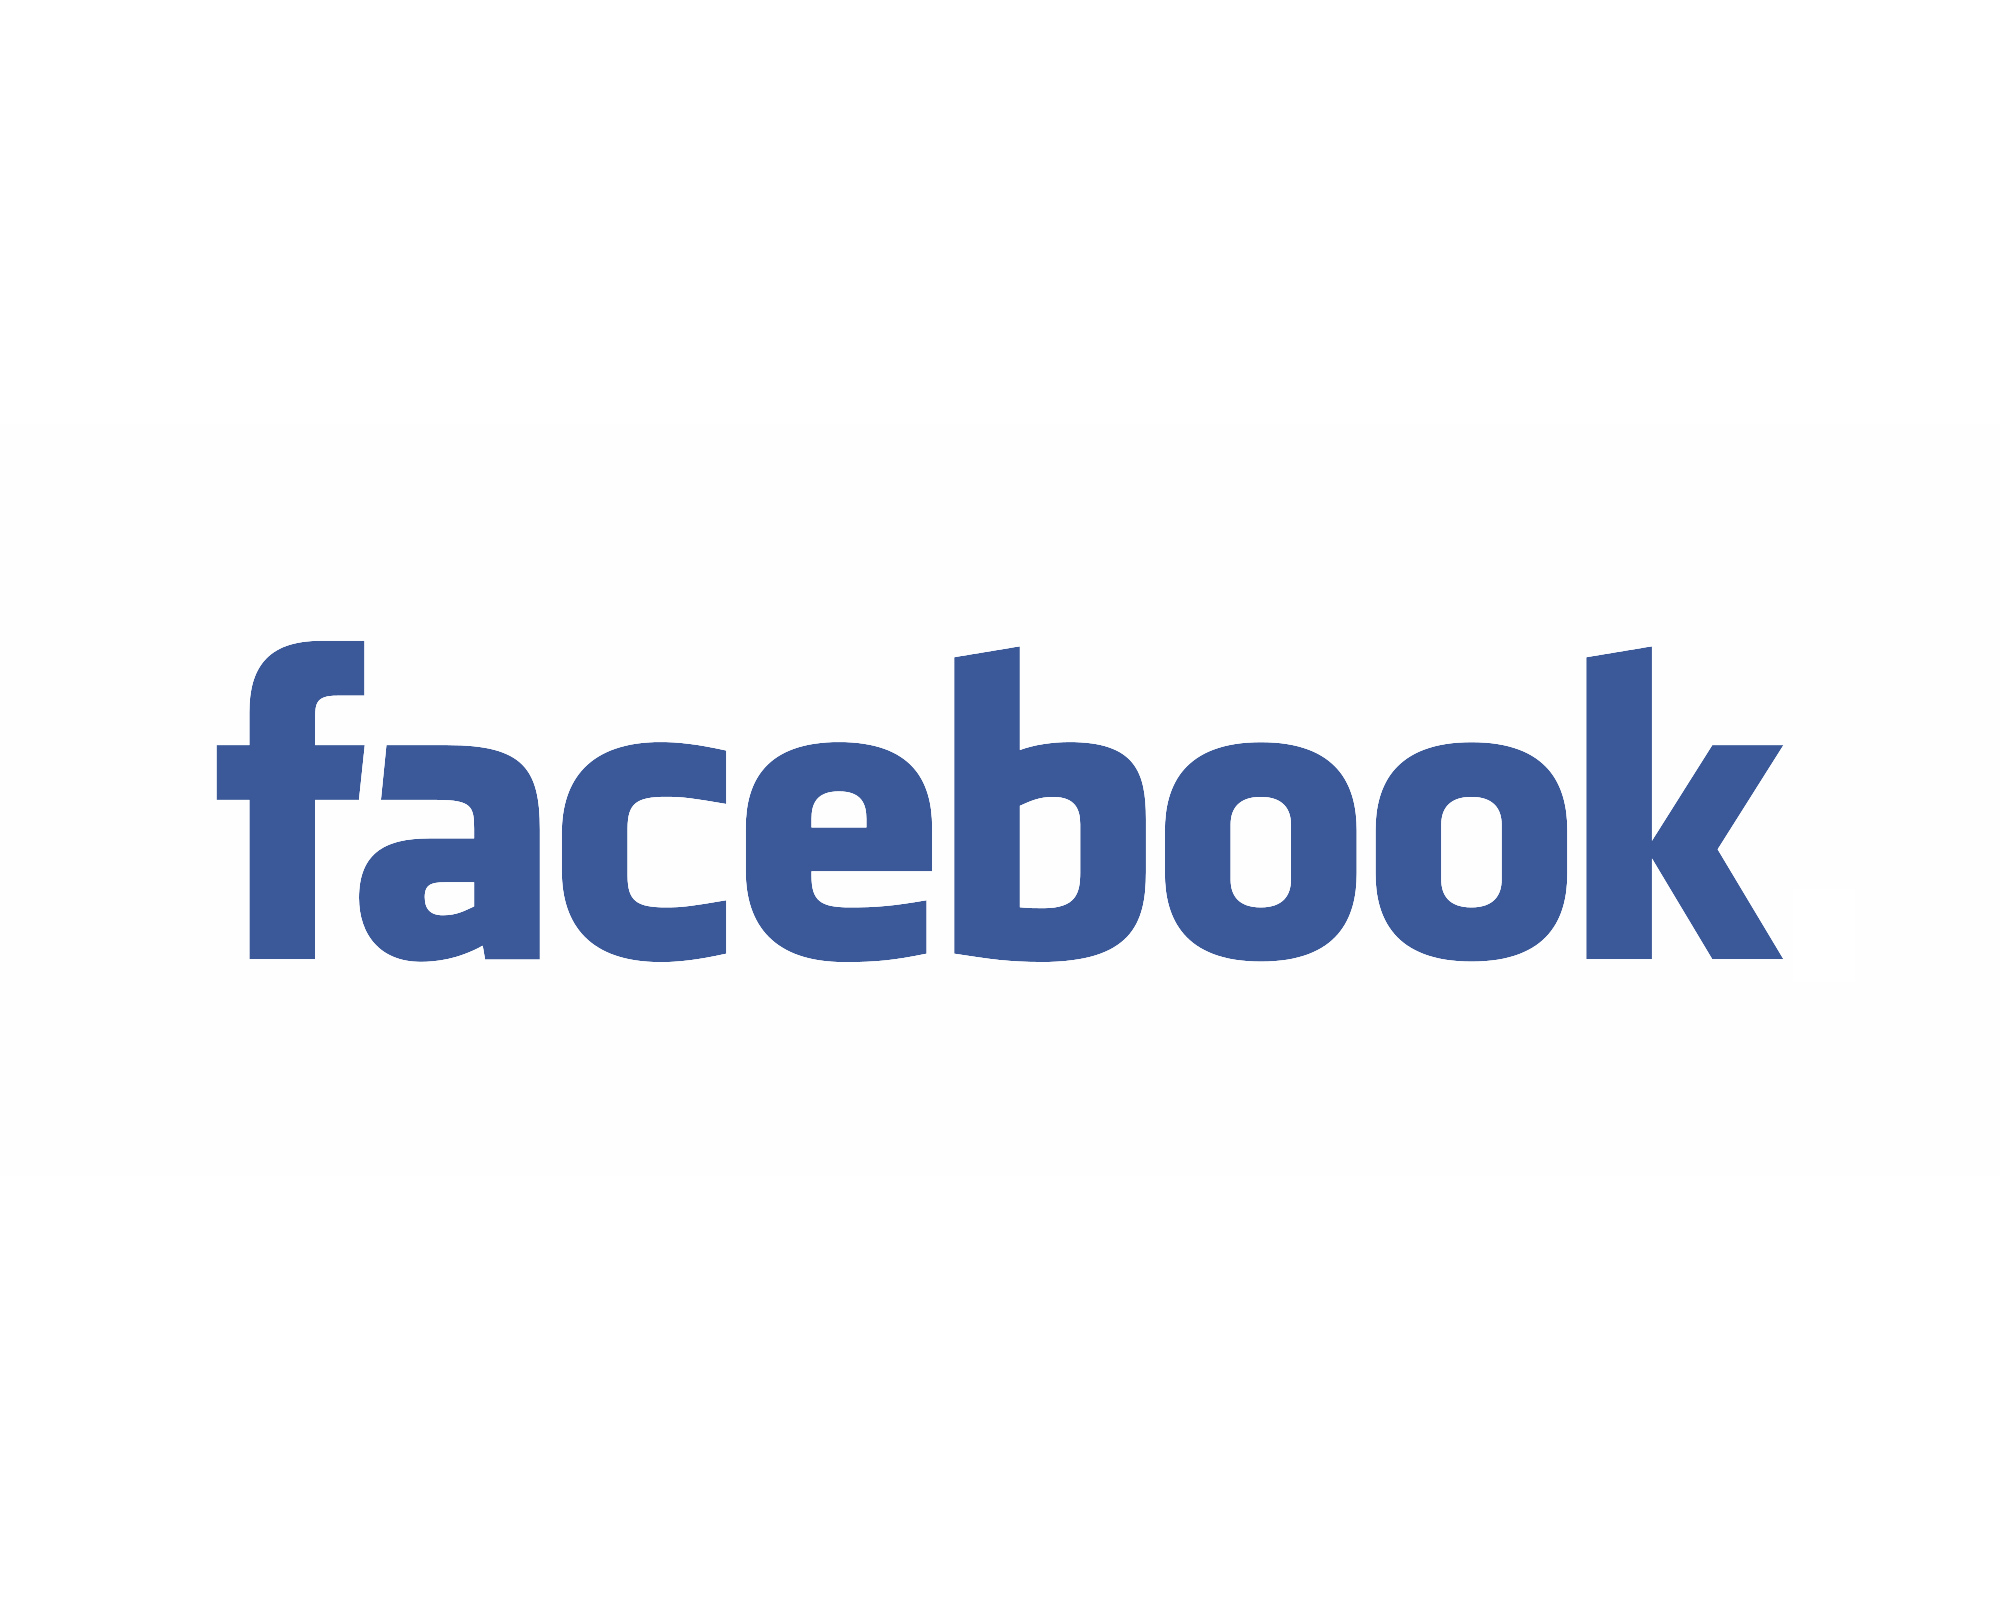 Facebook clipart wallpaper. Hd wallpapers free download